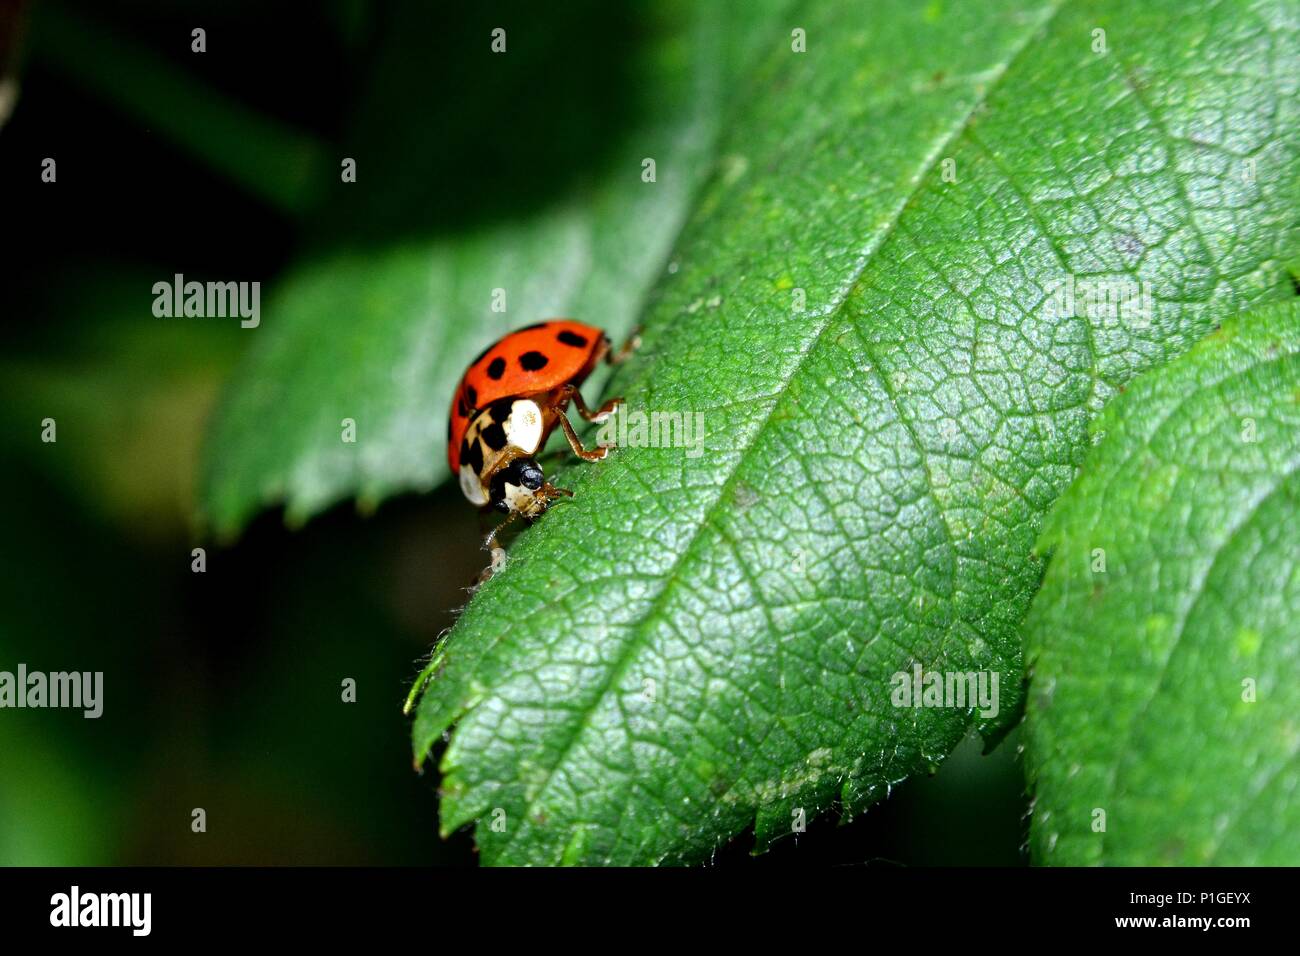 Ladybird on green leaf in nature Stock Photo